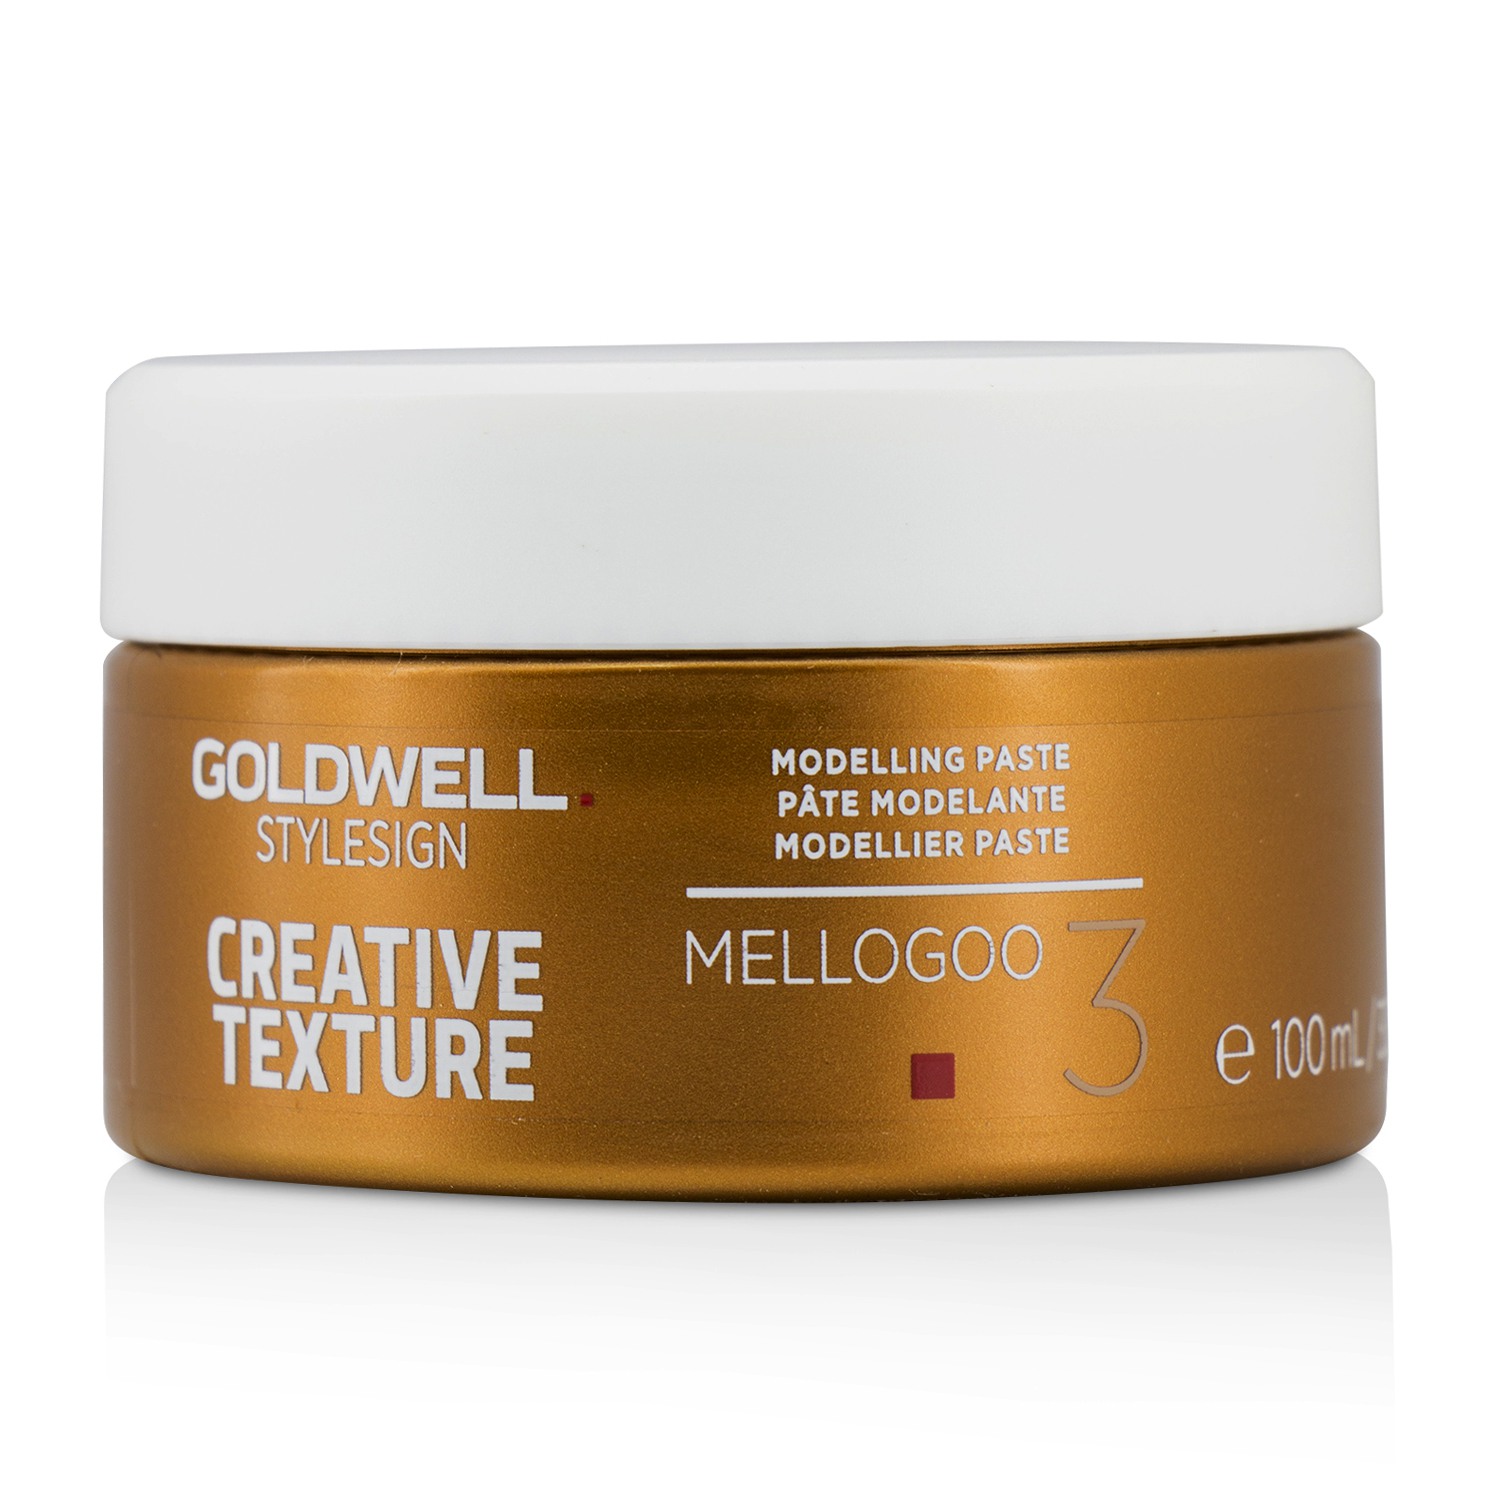 Dual Senses Scalp Specialist Anti-Hair Loss Shampoo (Cleansing For Thinning Hair) Goldwell Image